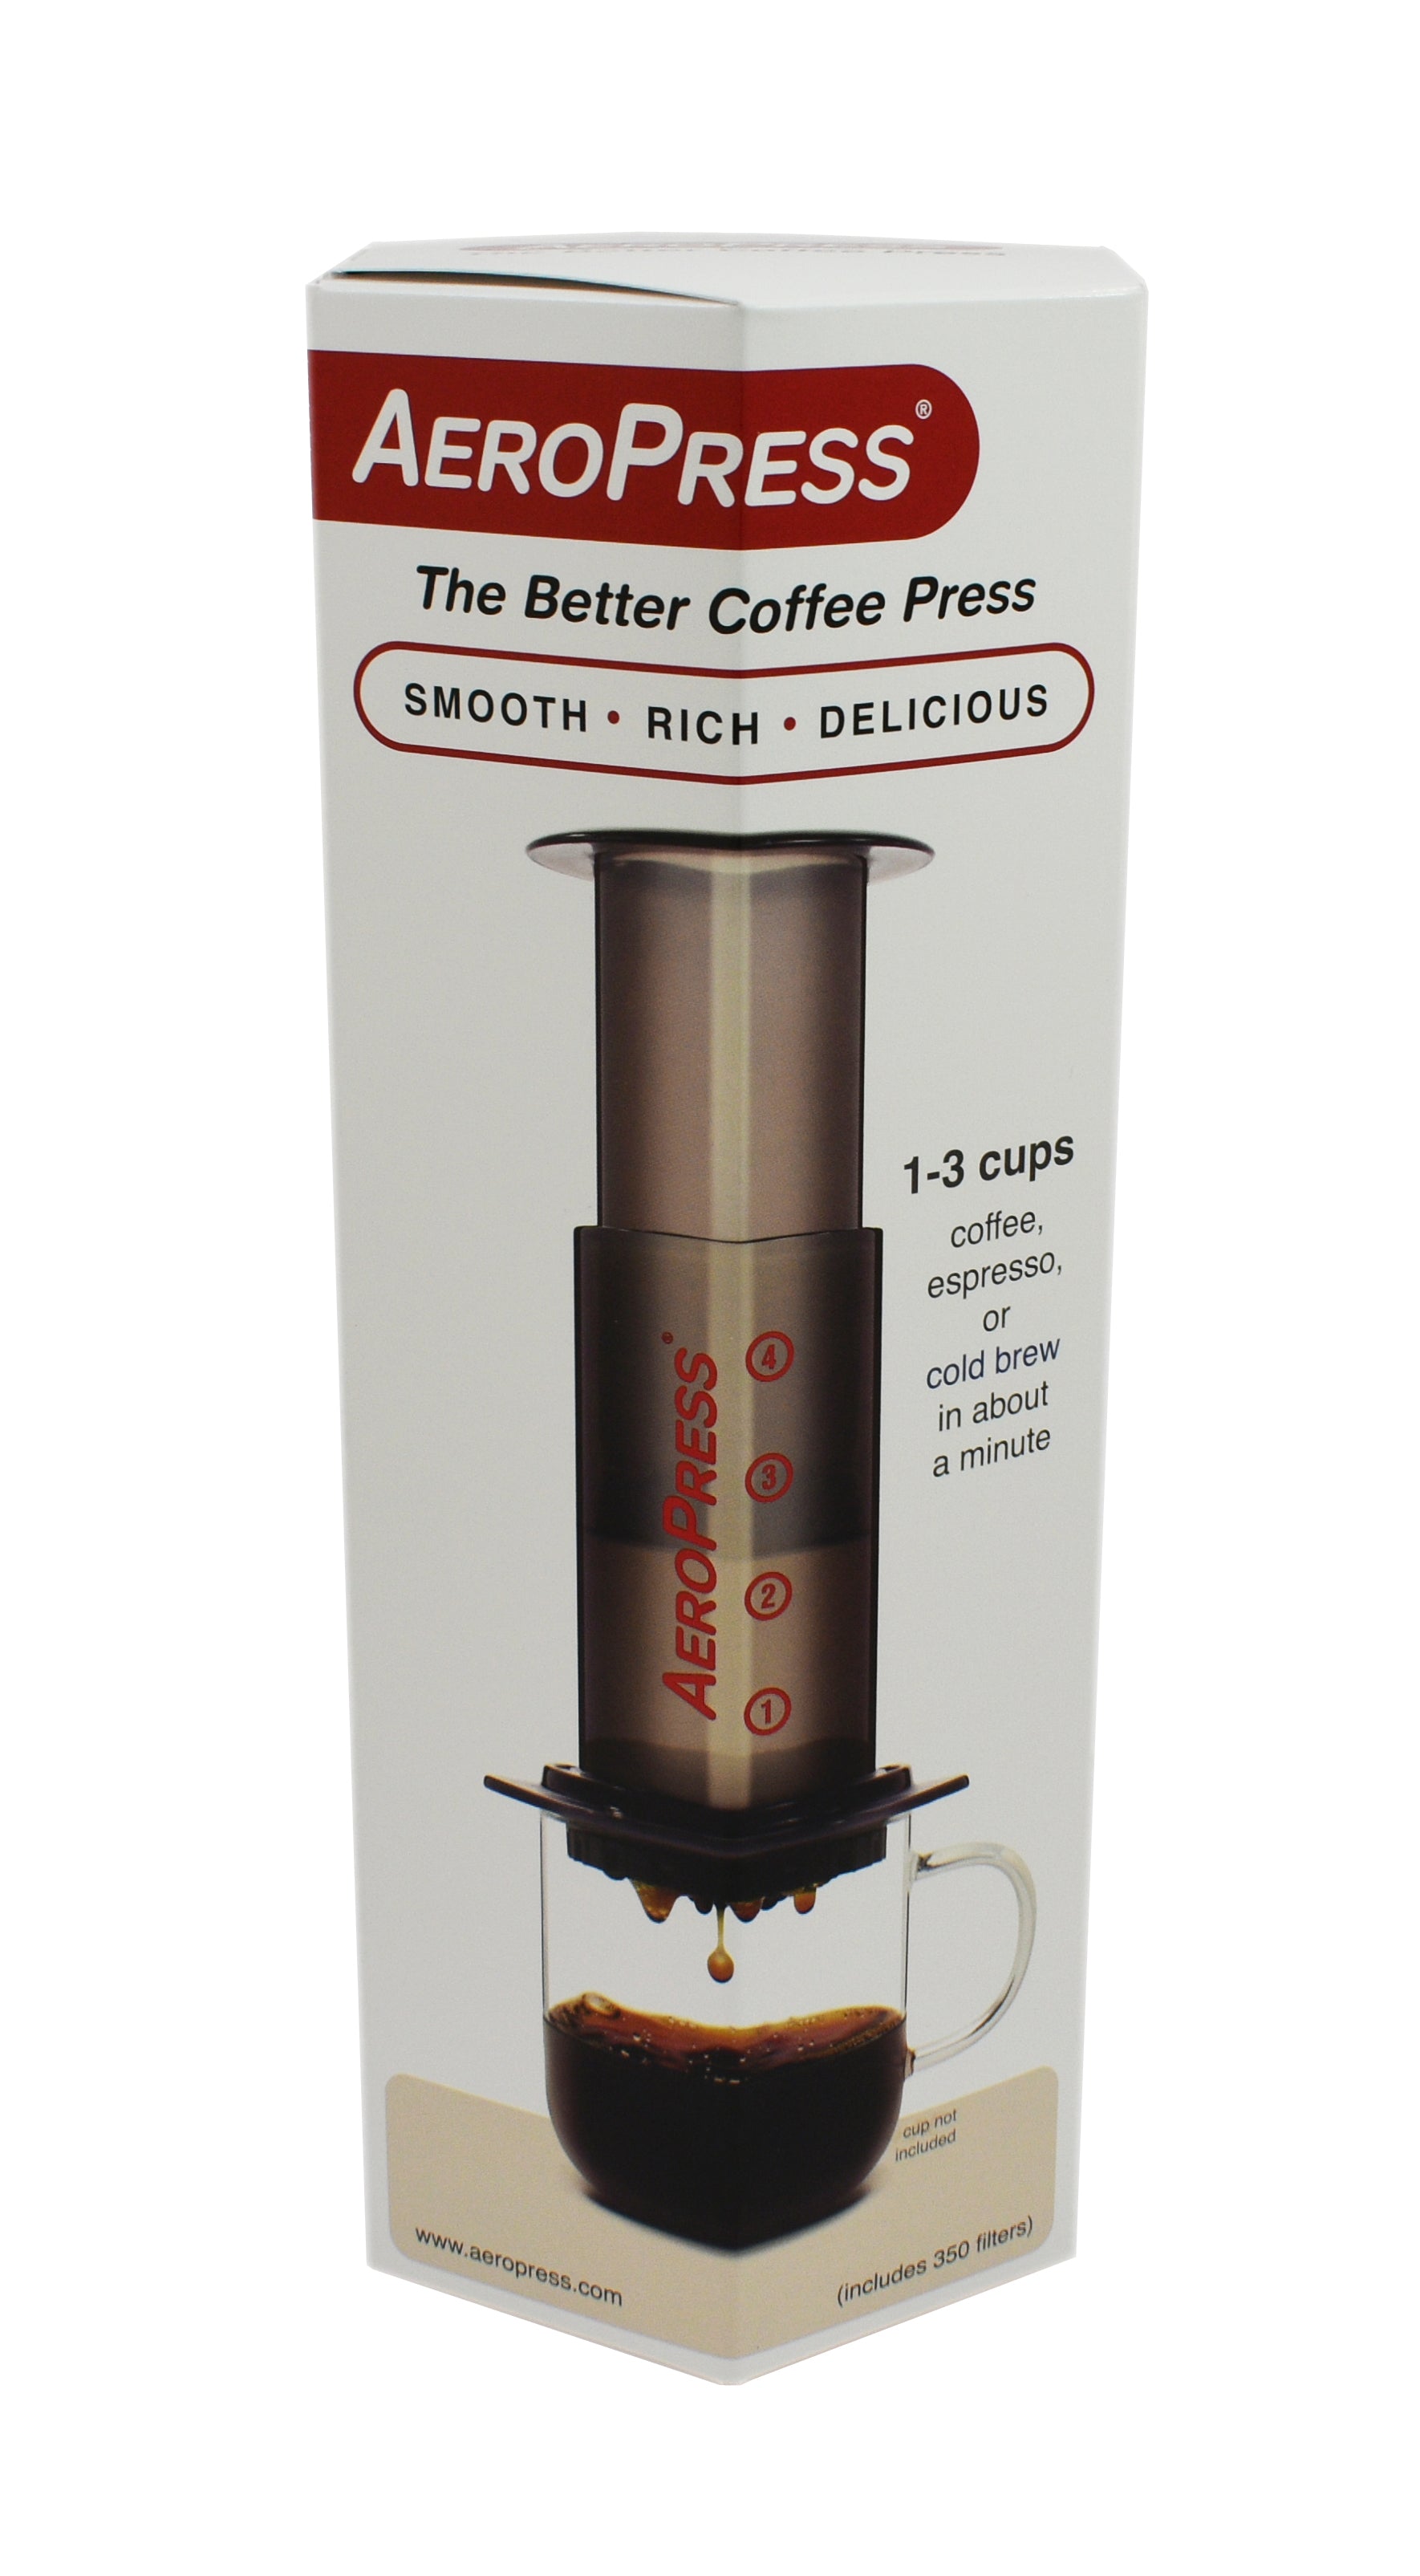 AeroPress Original Coffee Press – 3 in 1 brew method combines French Press,  Pourover, Espresso - Full bodied, smooth coffee without grit, bitterness 